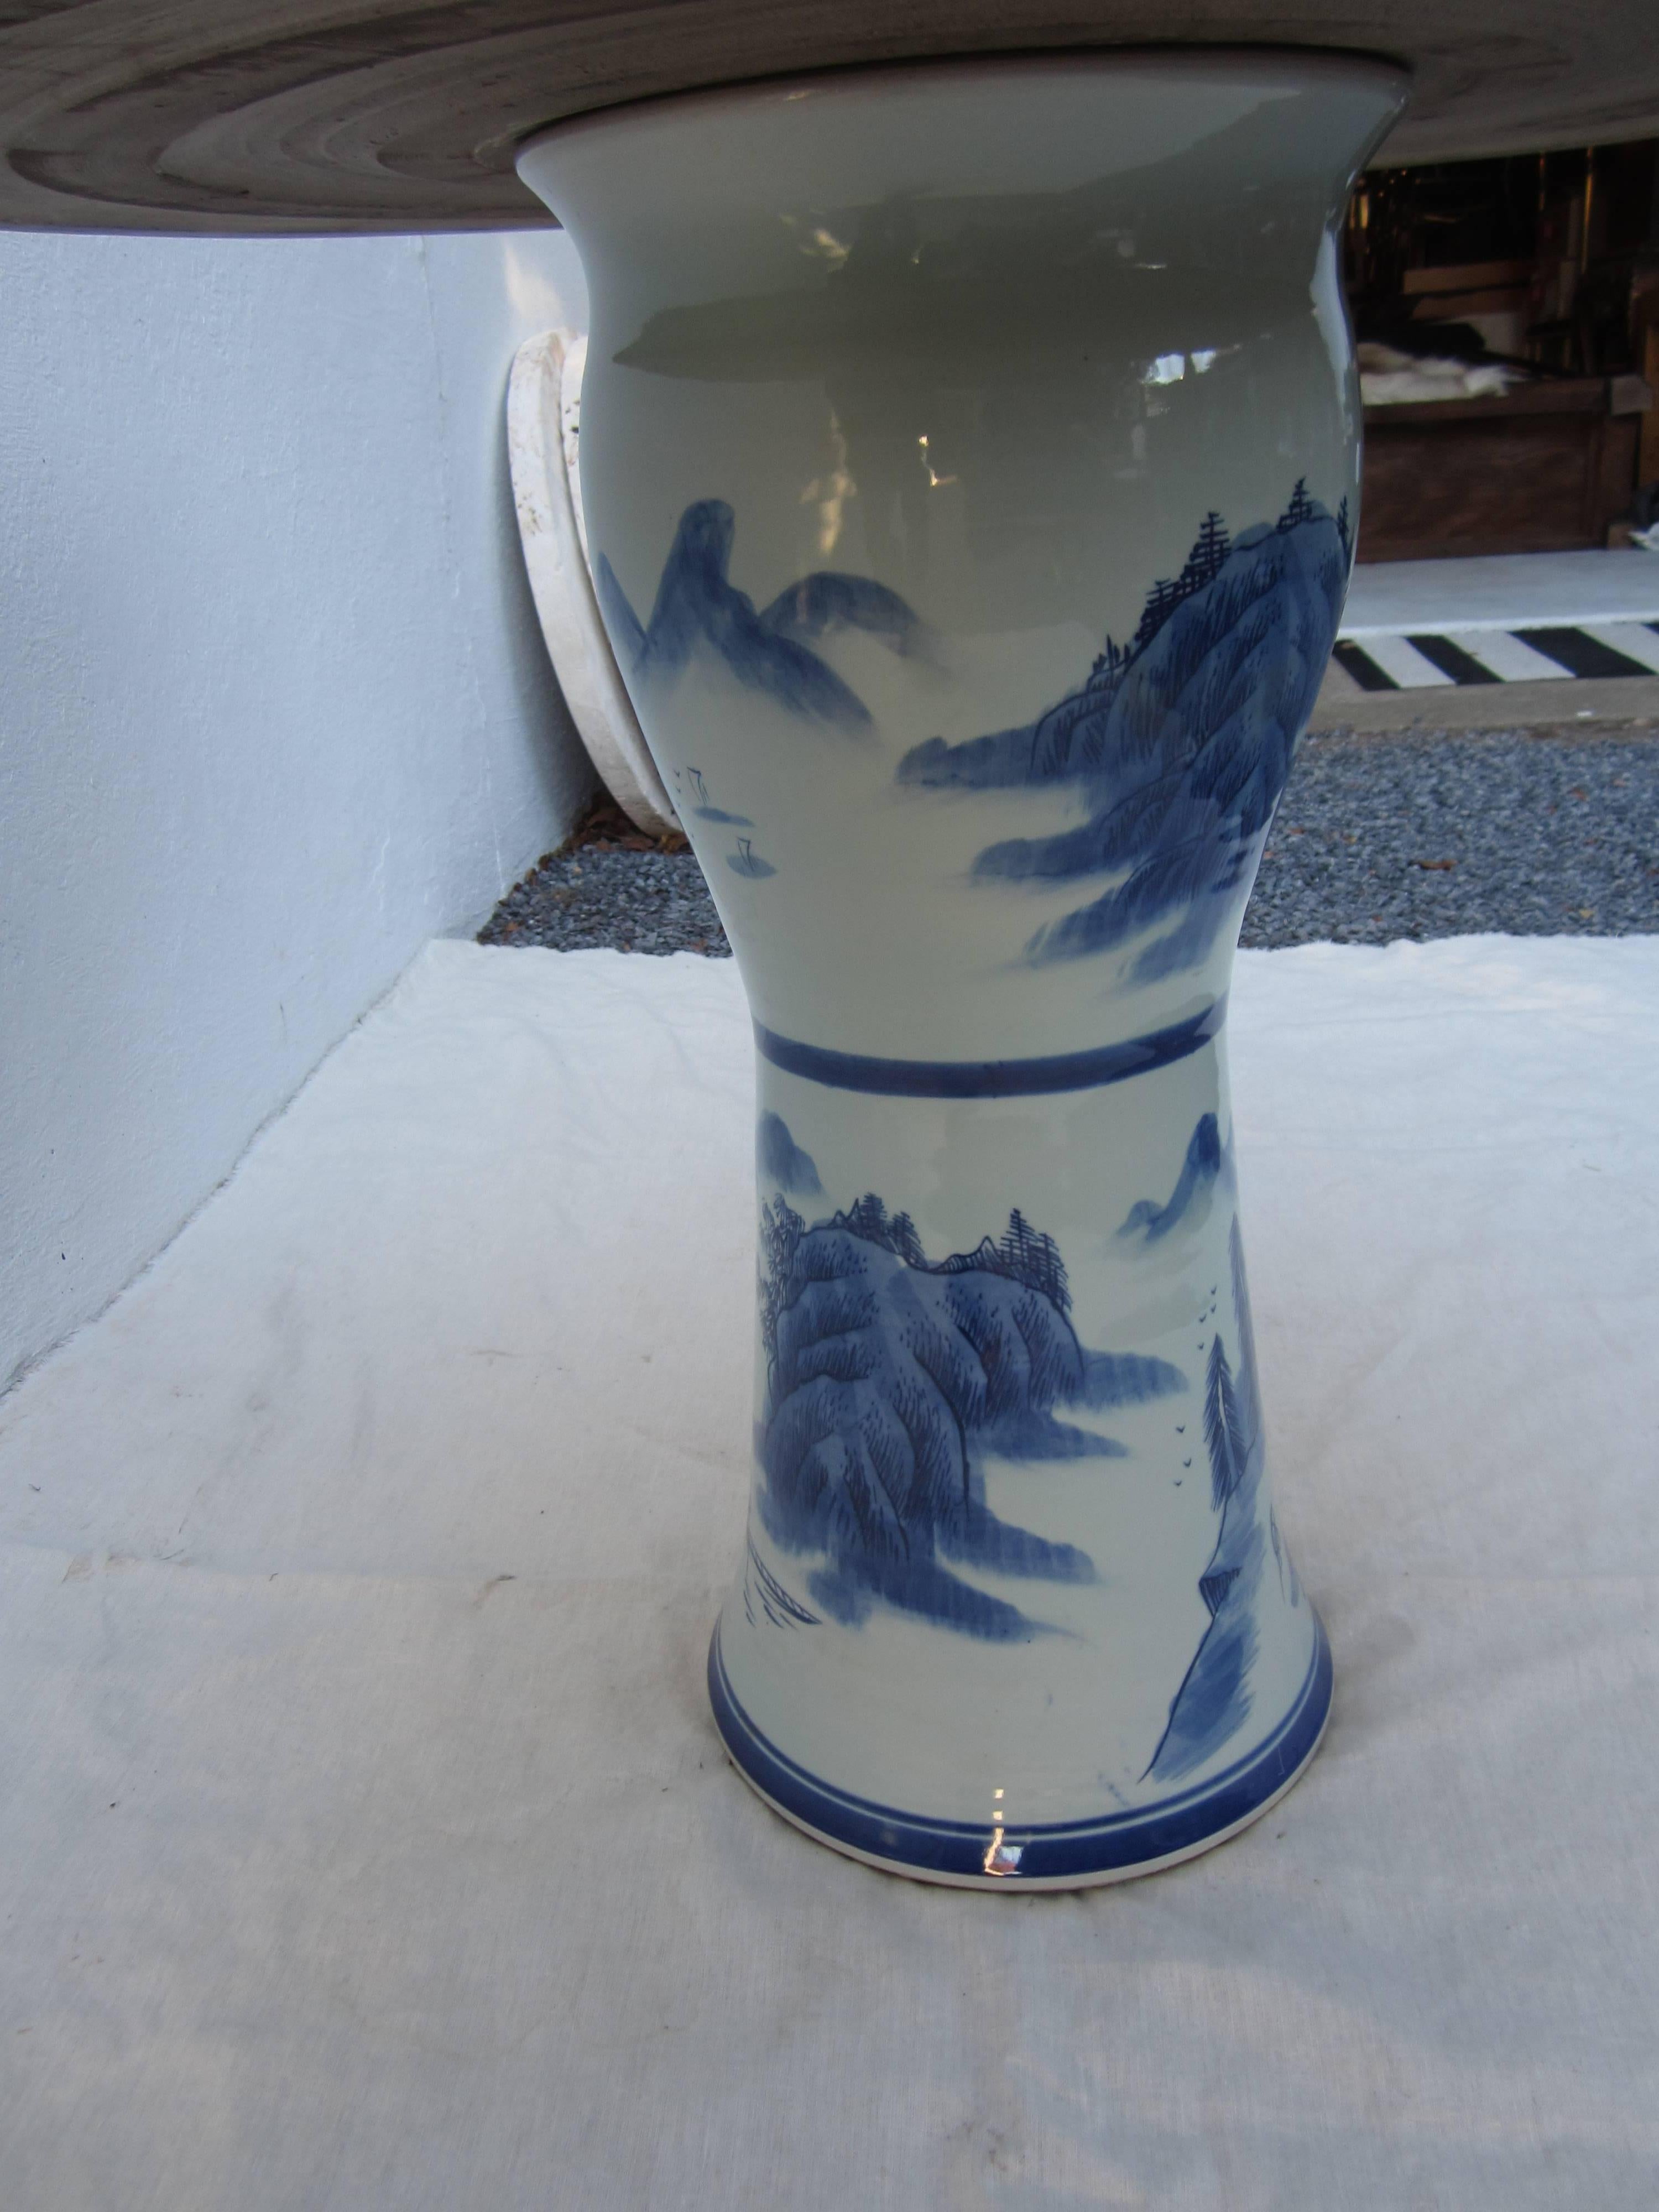 Very unique Chinese blue and white porcelain garden tabletop and base signed on top by artist.